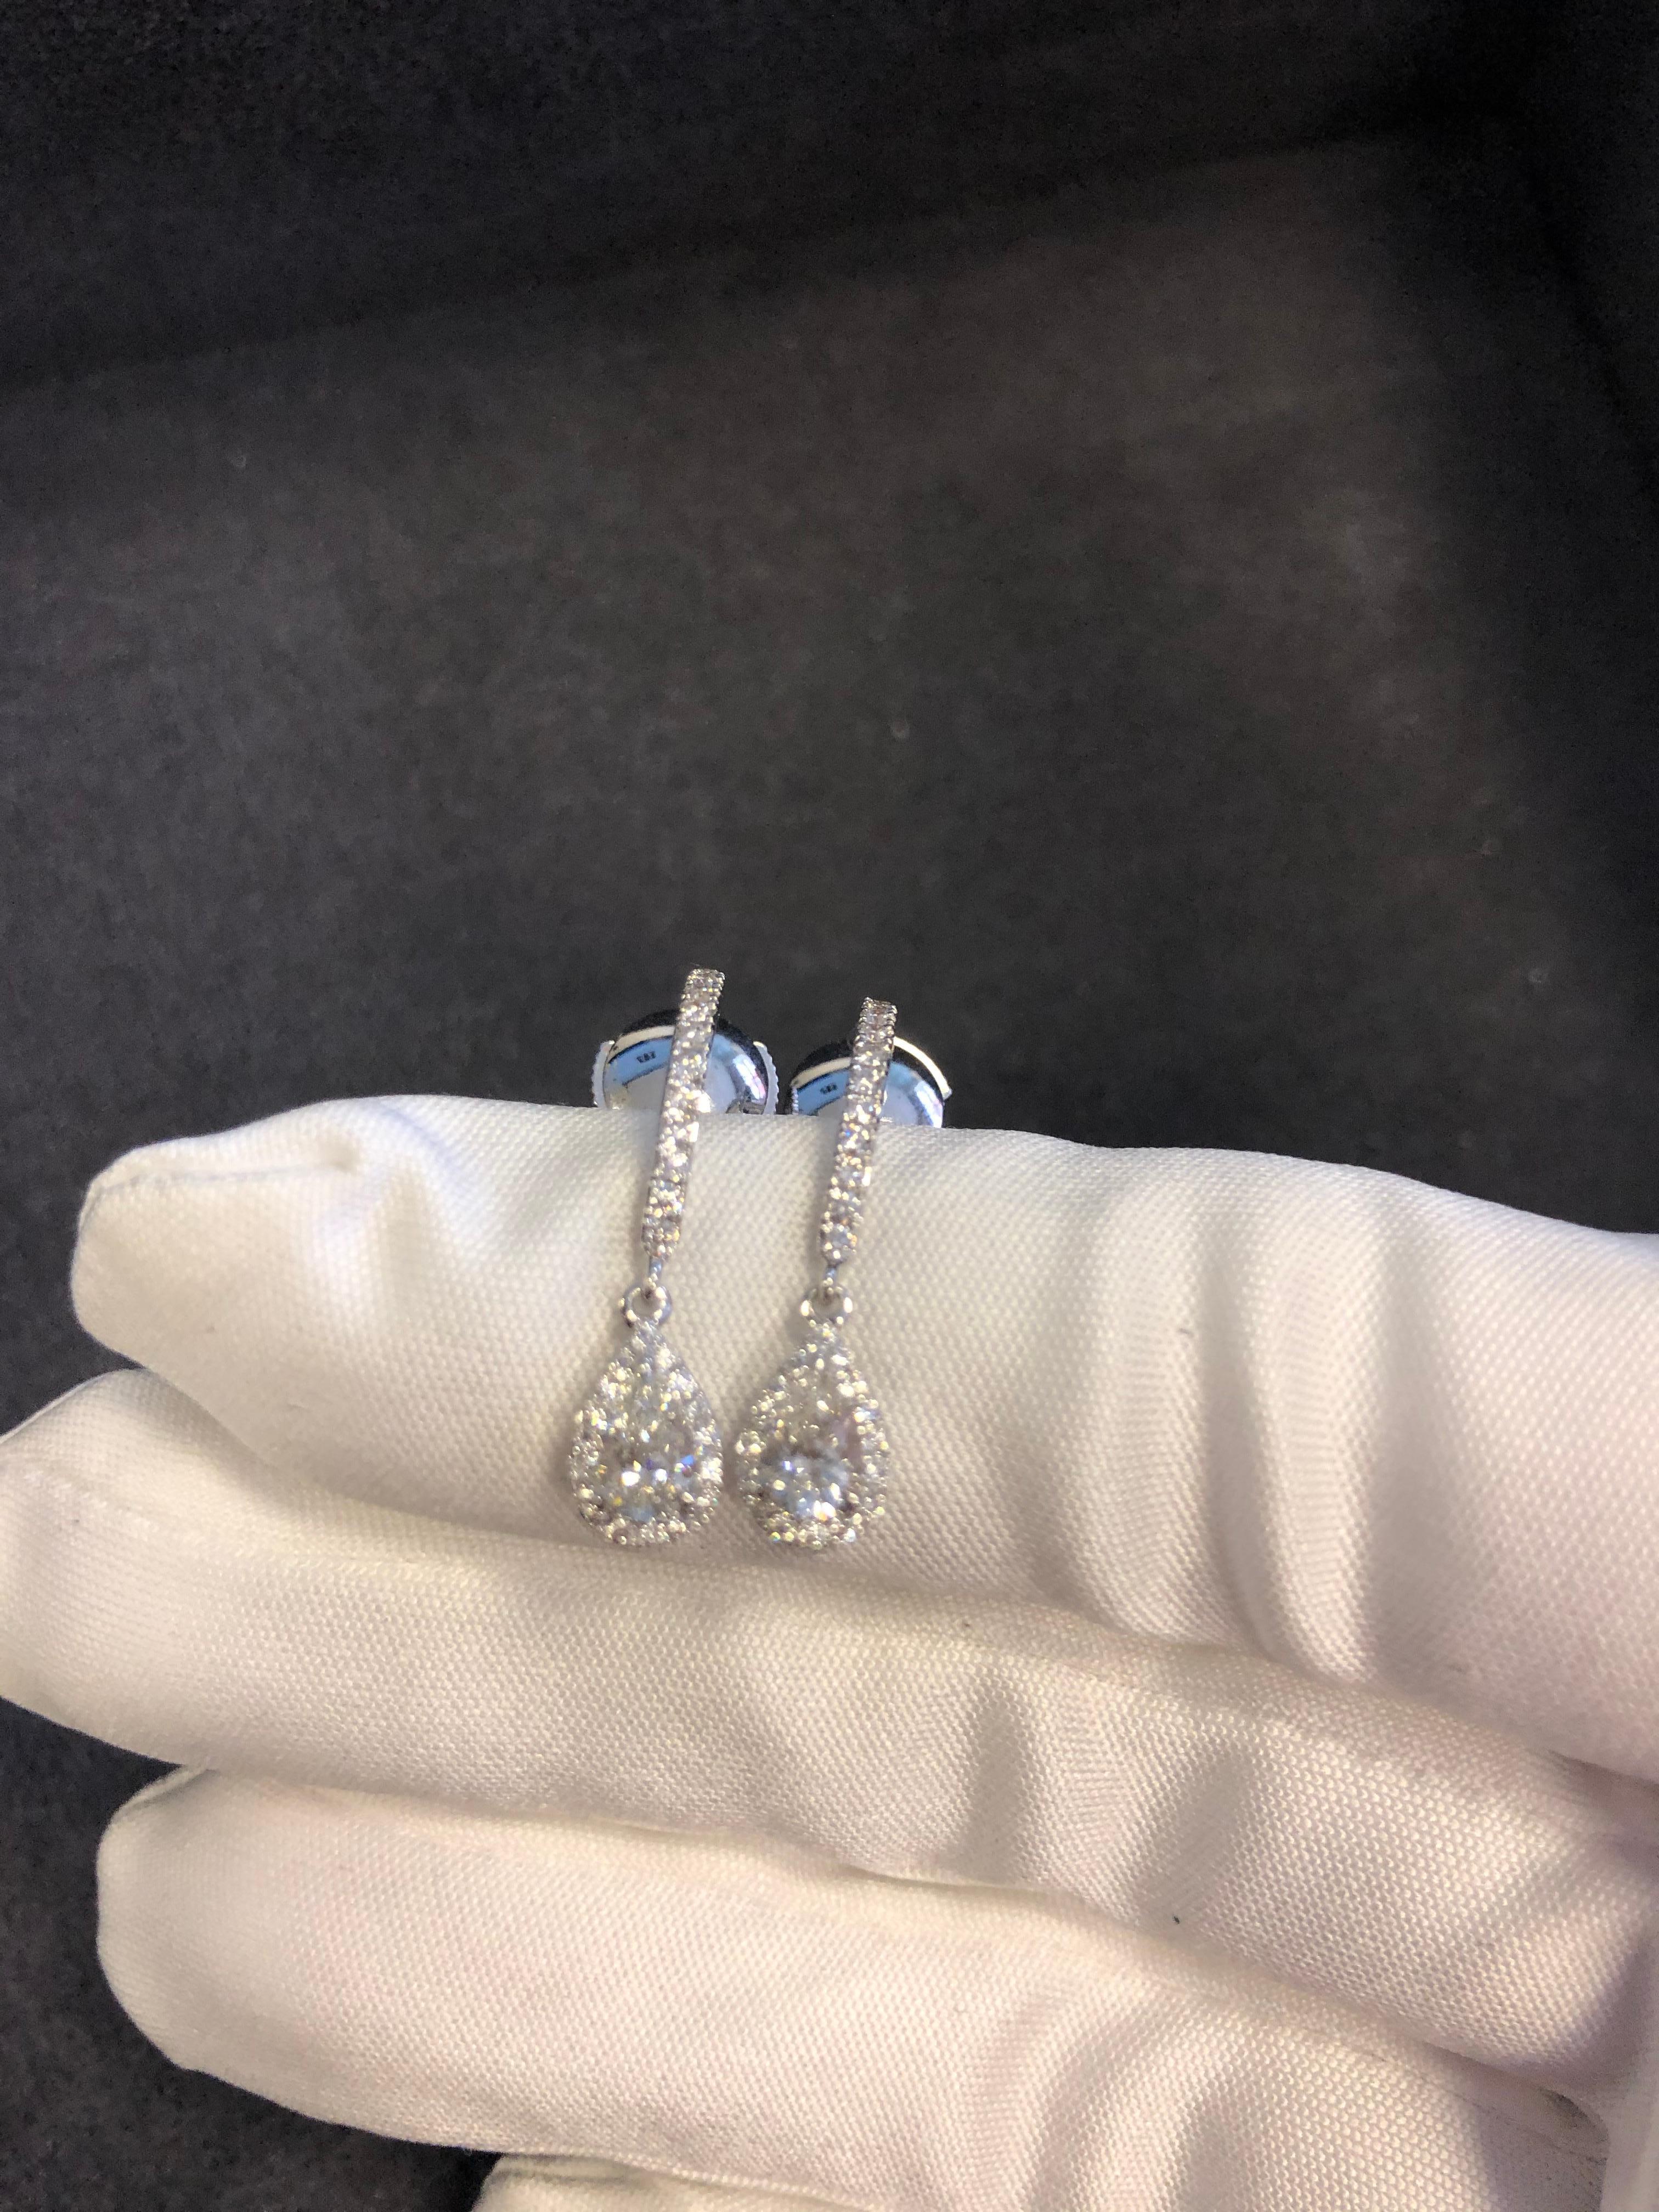 Messika Joy Sleeper Diamond Drop Earrings in 18 Karat White Gold, this pair of beautiful hand-crafted earrings by Maison Messika made in 18 Karat White Gold and set with pear shaped diamonds weighing 0.51cts, this delicate pair of earrings can be